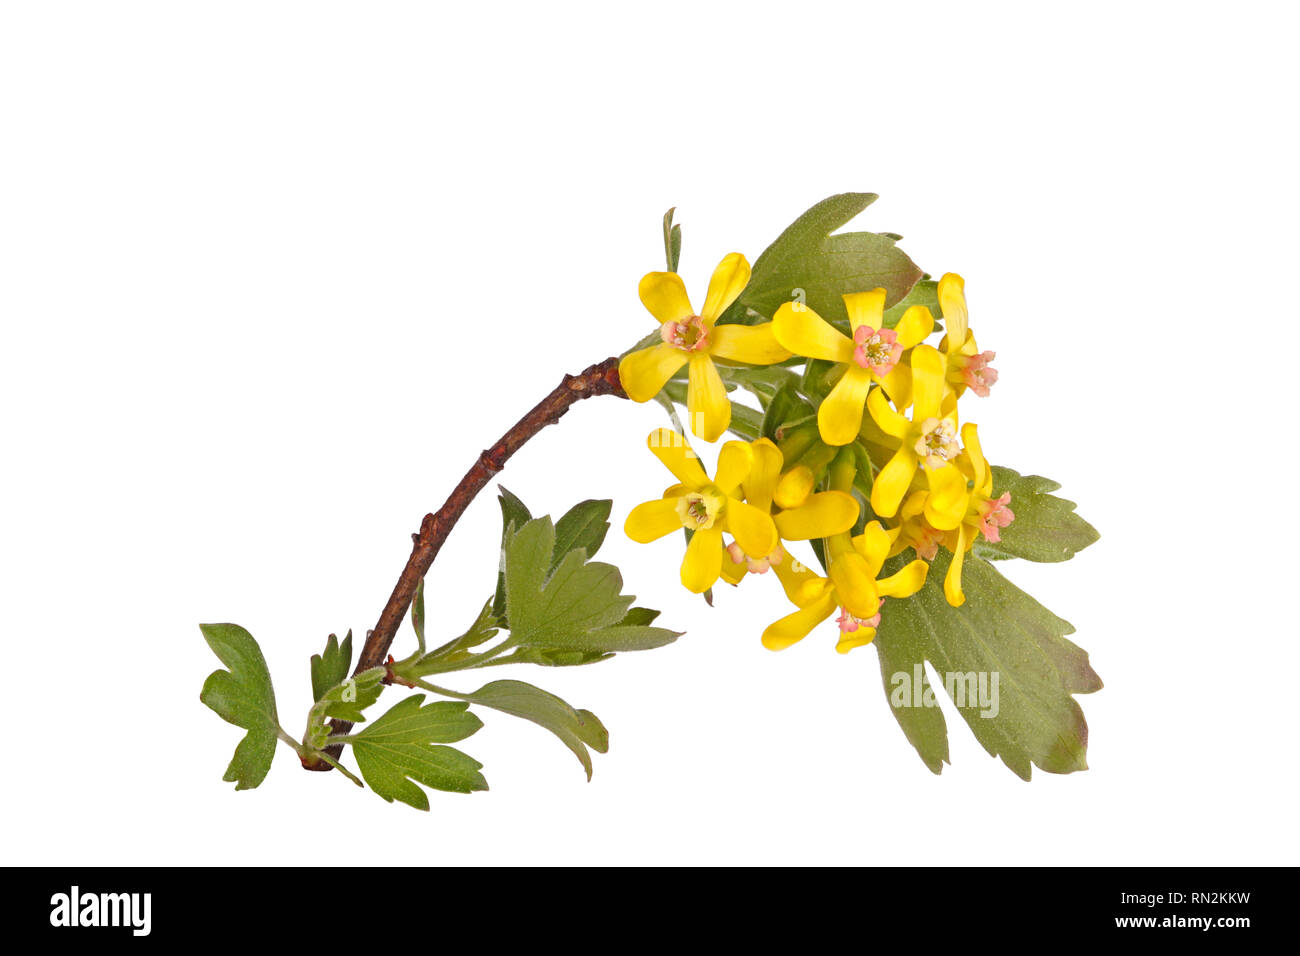 Stem with many yellow flowers of the North American native clove currant (Ribes odoratum) isolated against a white background Stock Photo